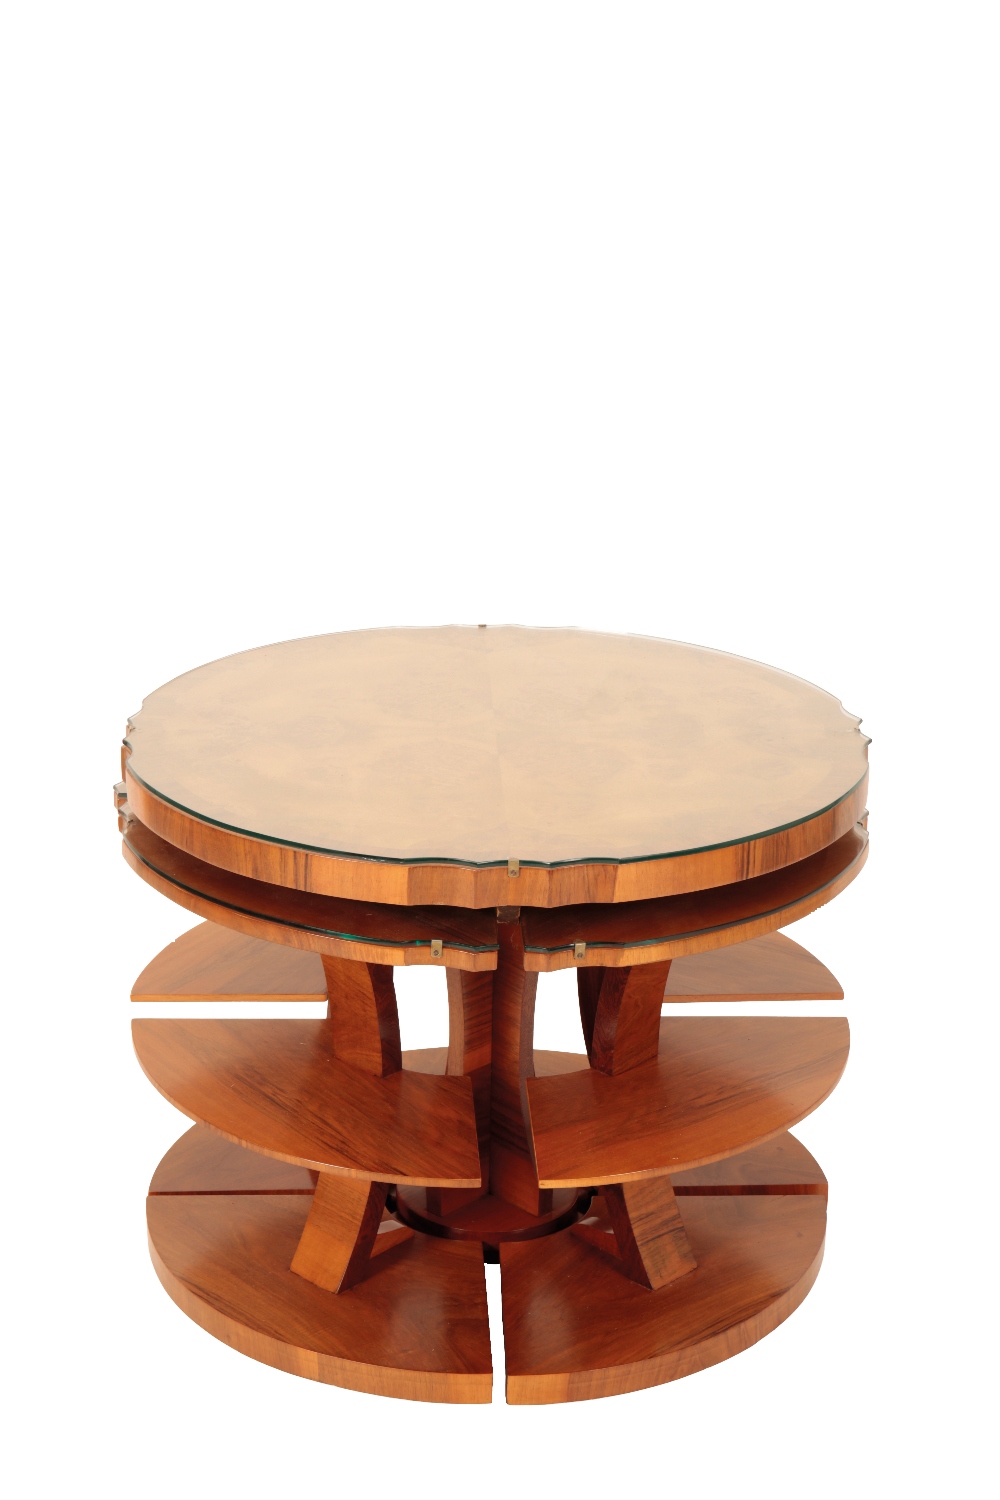 HARRY AND LOU EPSTEIN: A BIRDSEYE MAPLE AND WALNUT NEST OF TABLES